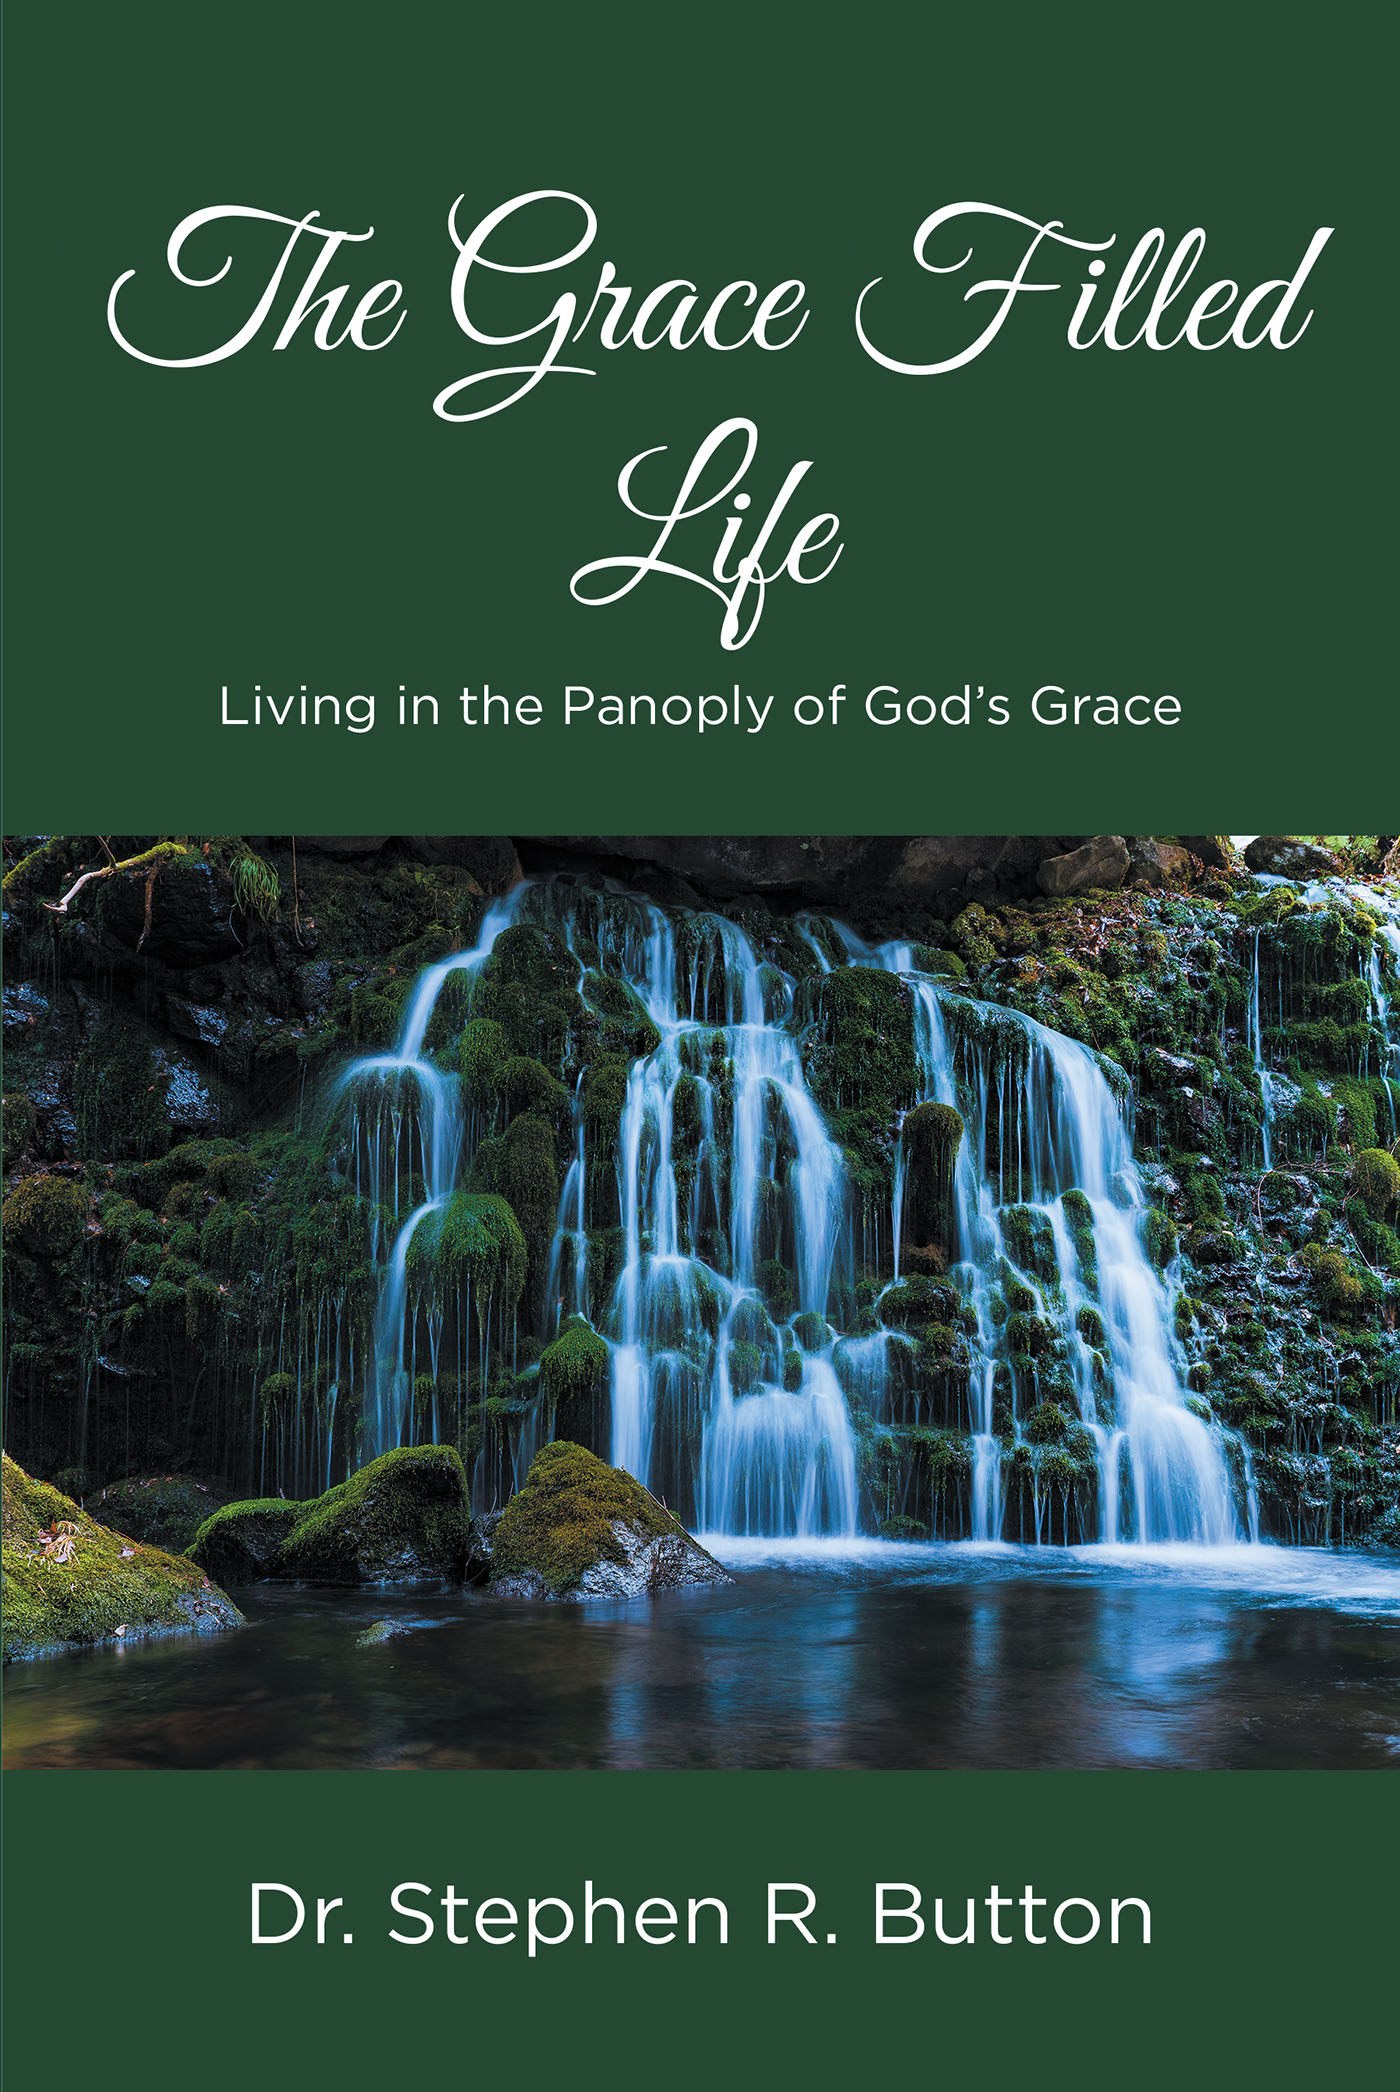 Author Dr. Stephen R. Button’s New Book, "The Grace Filled Life," is a Profound Exploration Designed to Help Readers Apply God's Everlasting Grace to Their Daily Lives